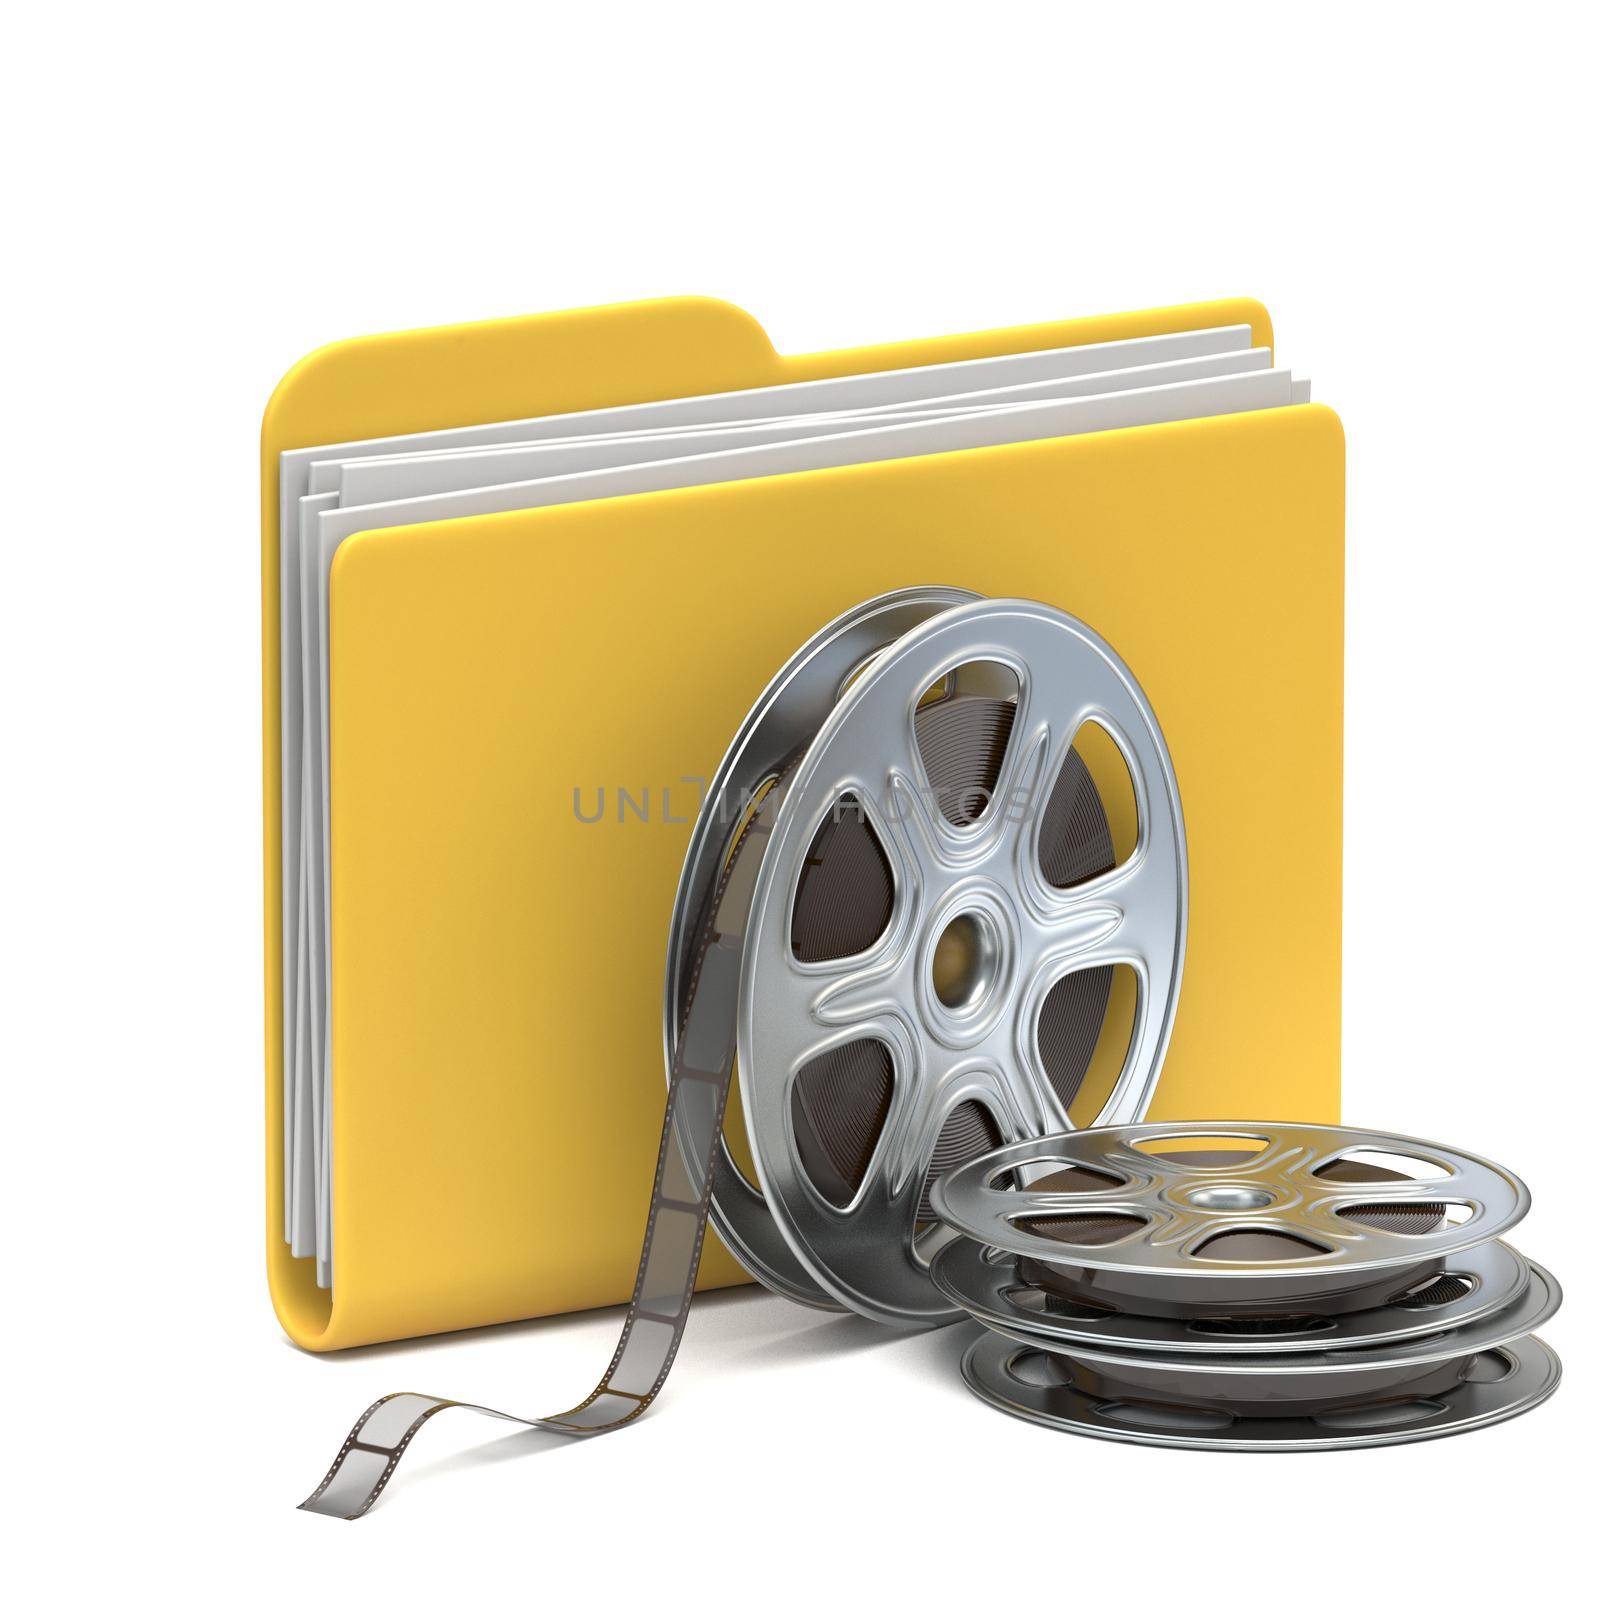 Yellow folder icon Movies 3D rendering illustration isolated on white background